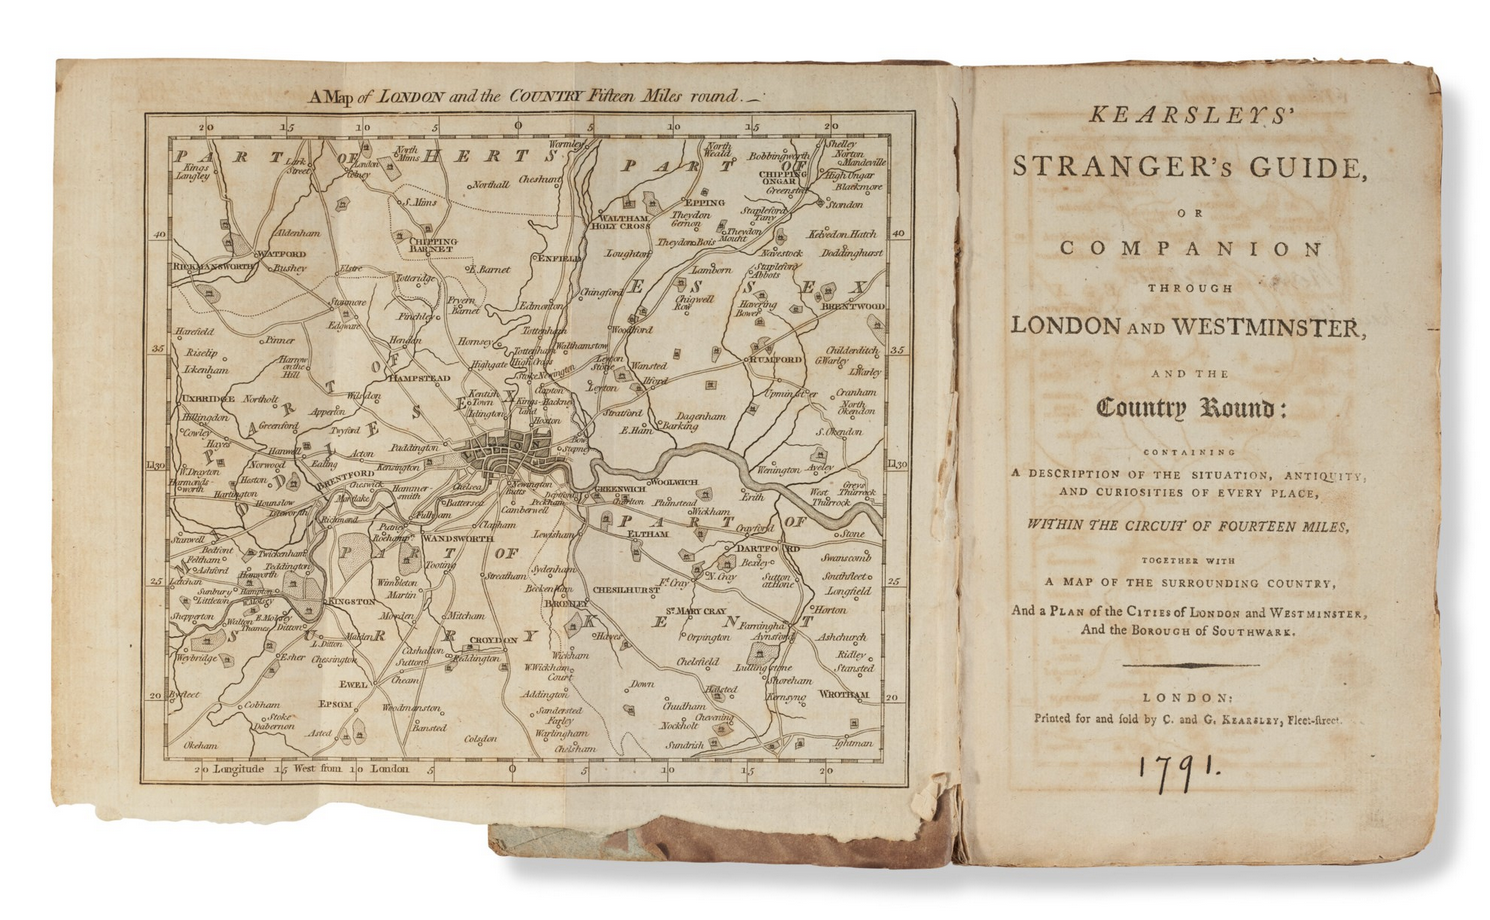 book open to title page, Kearsley’s Stranger's Guide to London, and fold out map (of London in the 18th century)